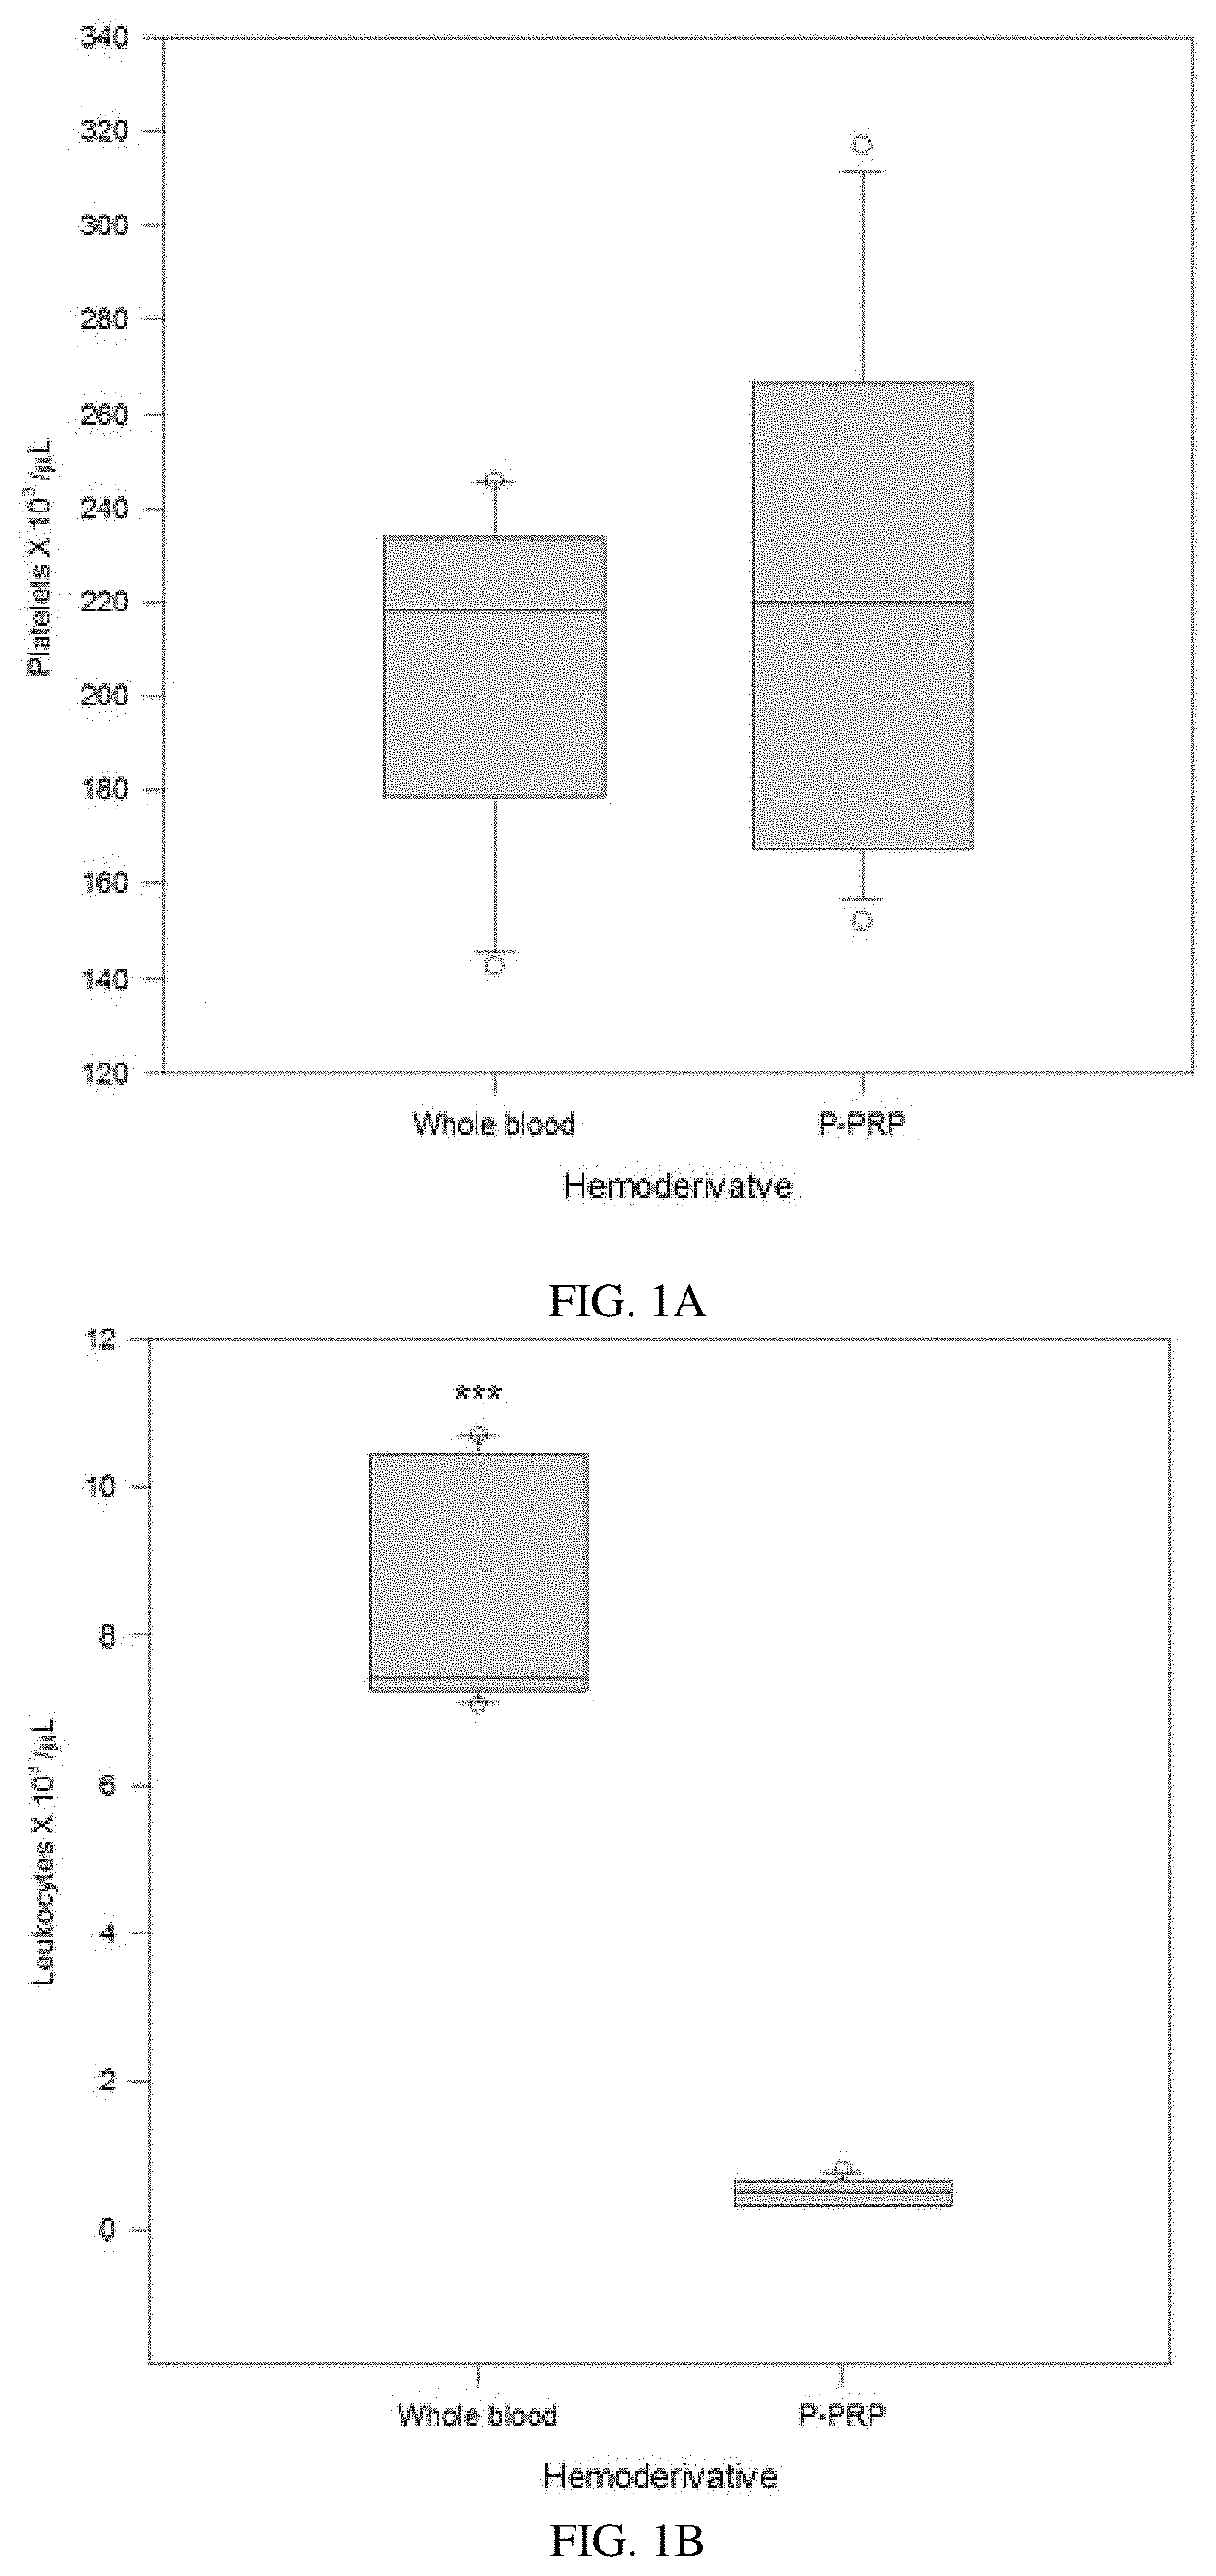 Pure platelet-rich plasma (P-PRP) composition for treatment of subclinical mastitis and methods of producing and using the same